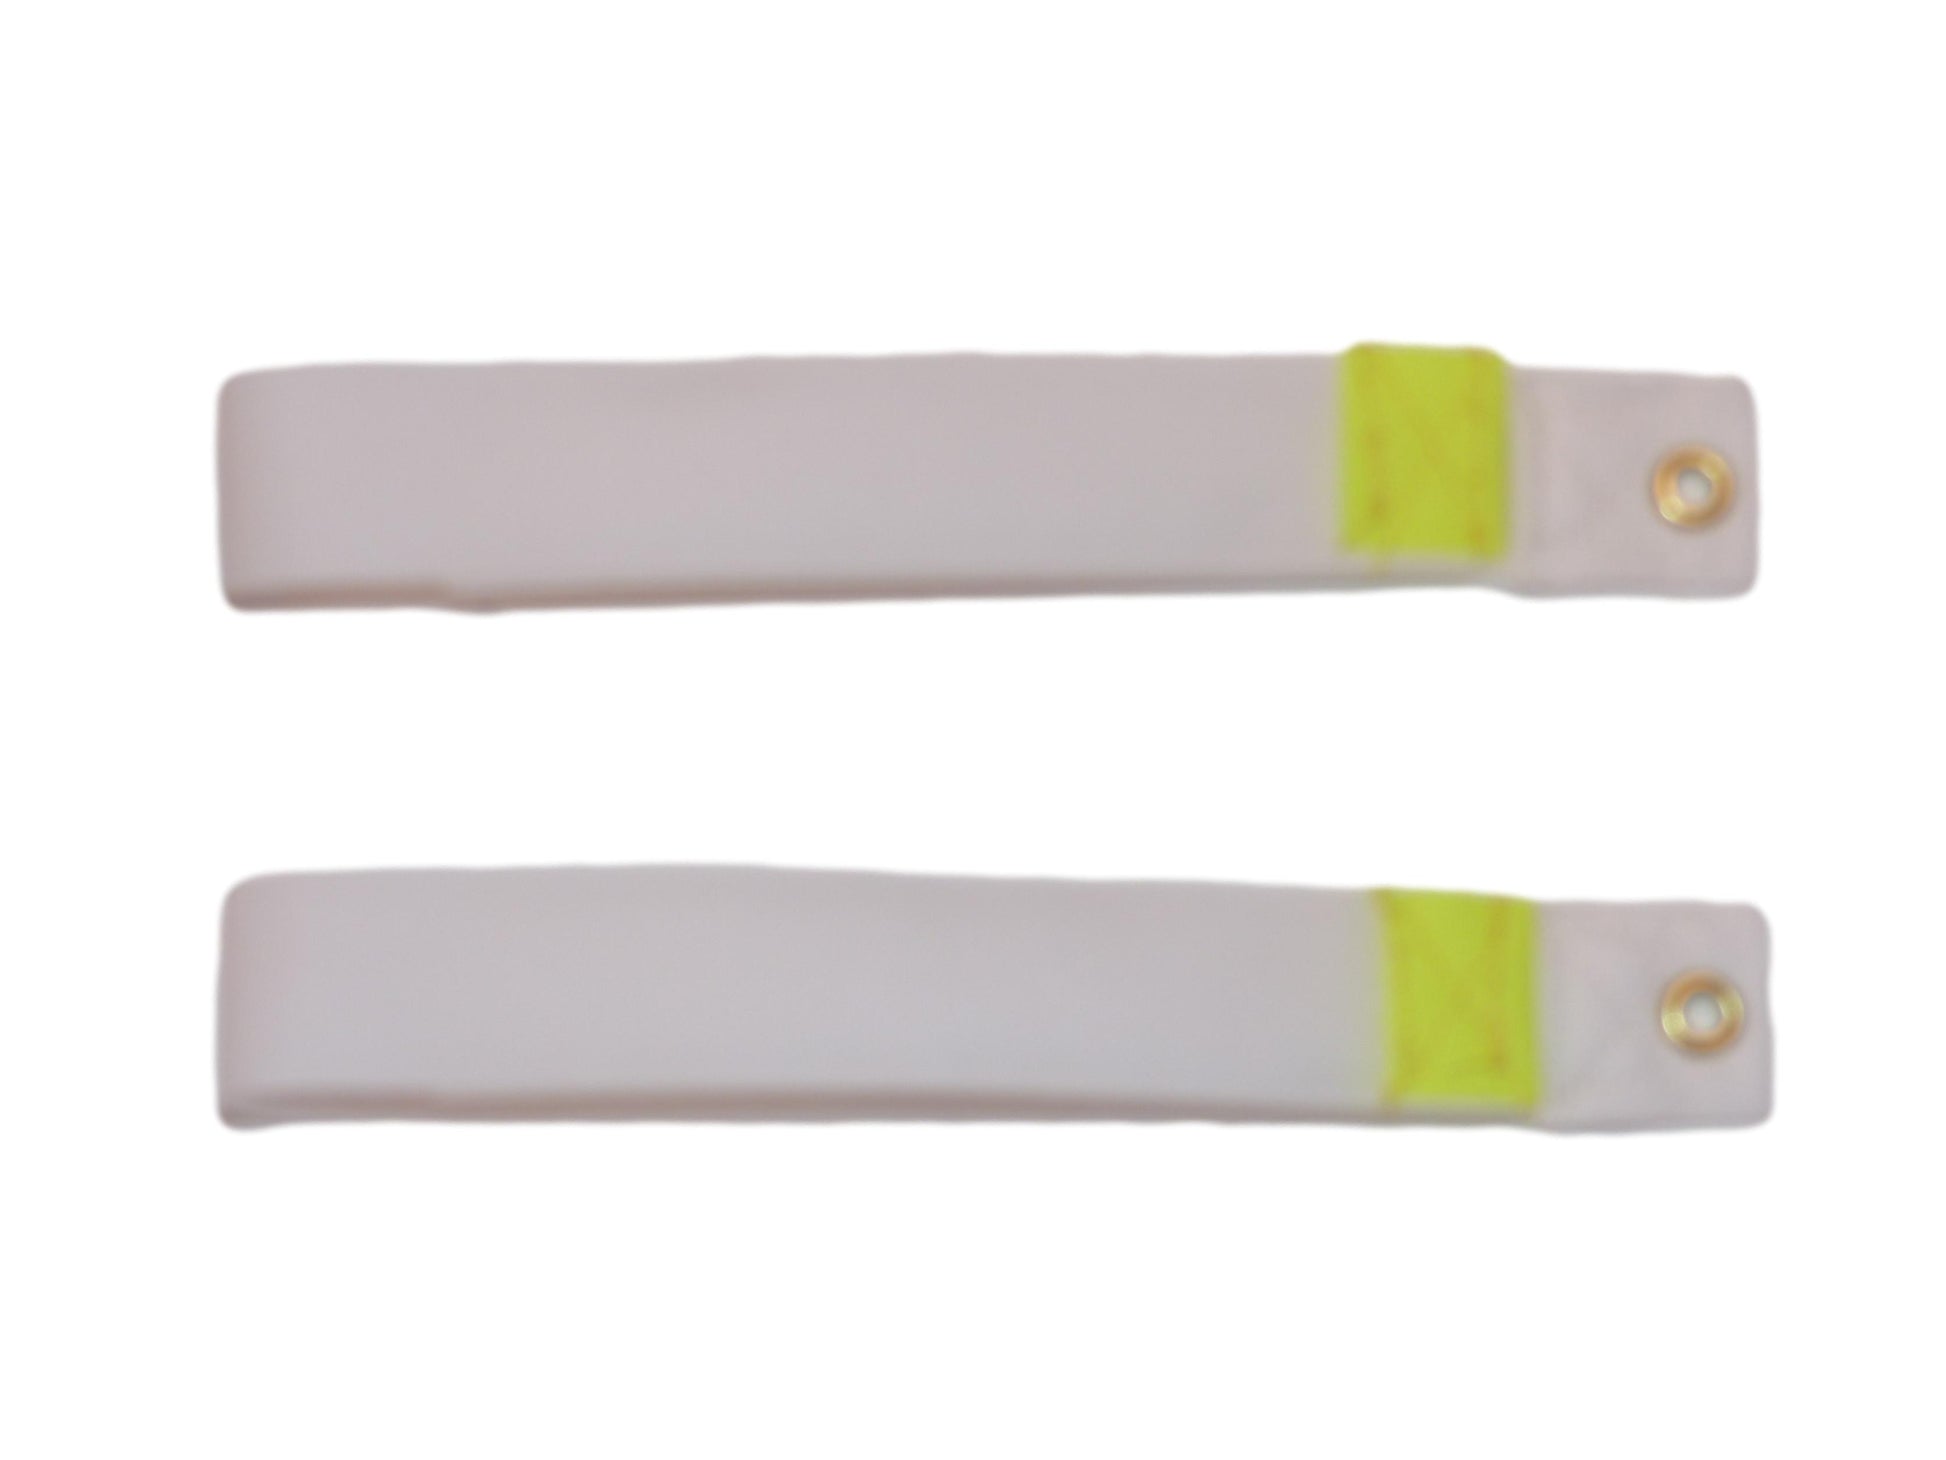 Benristraps 25mm Hook Loop Tidy & Hang Strap with Eyelet (Pack of Two) in white